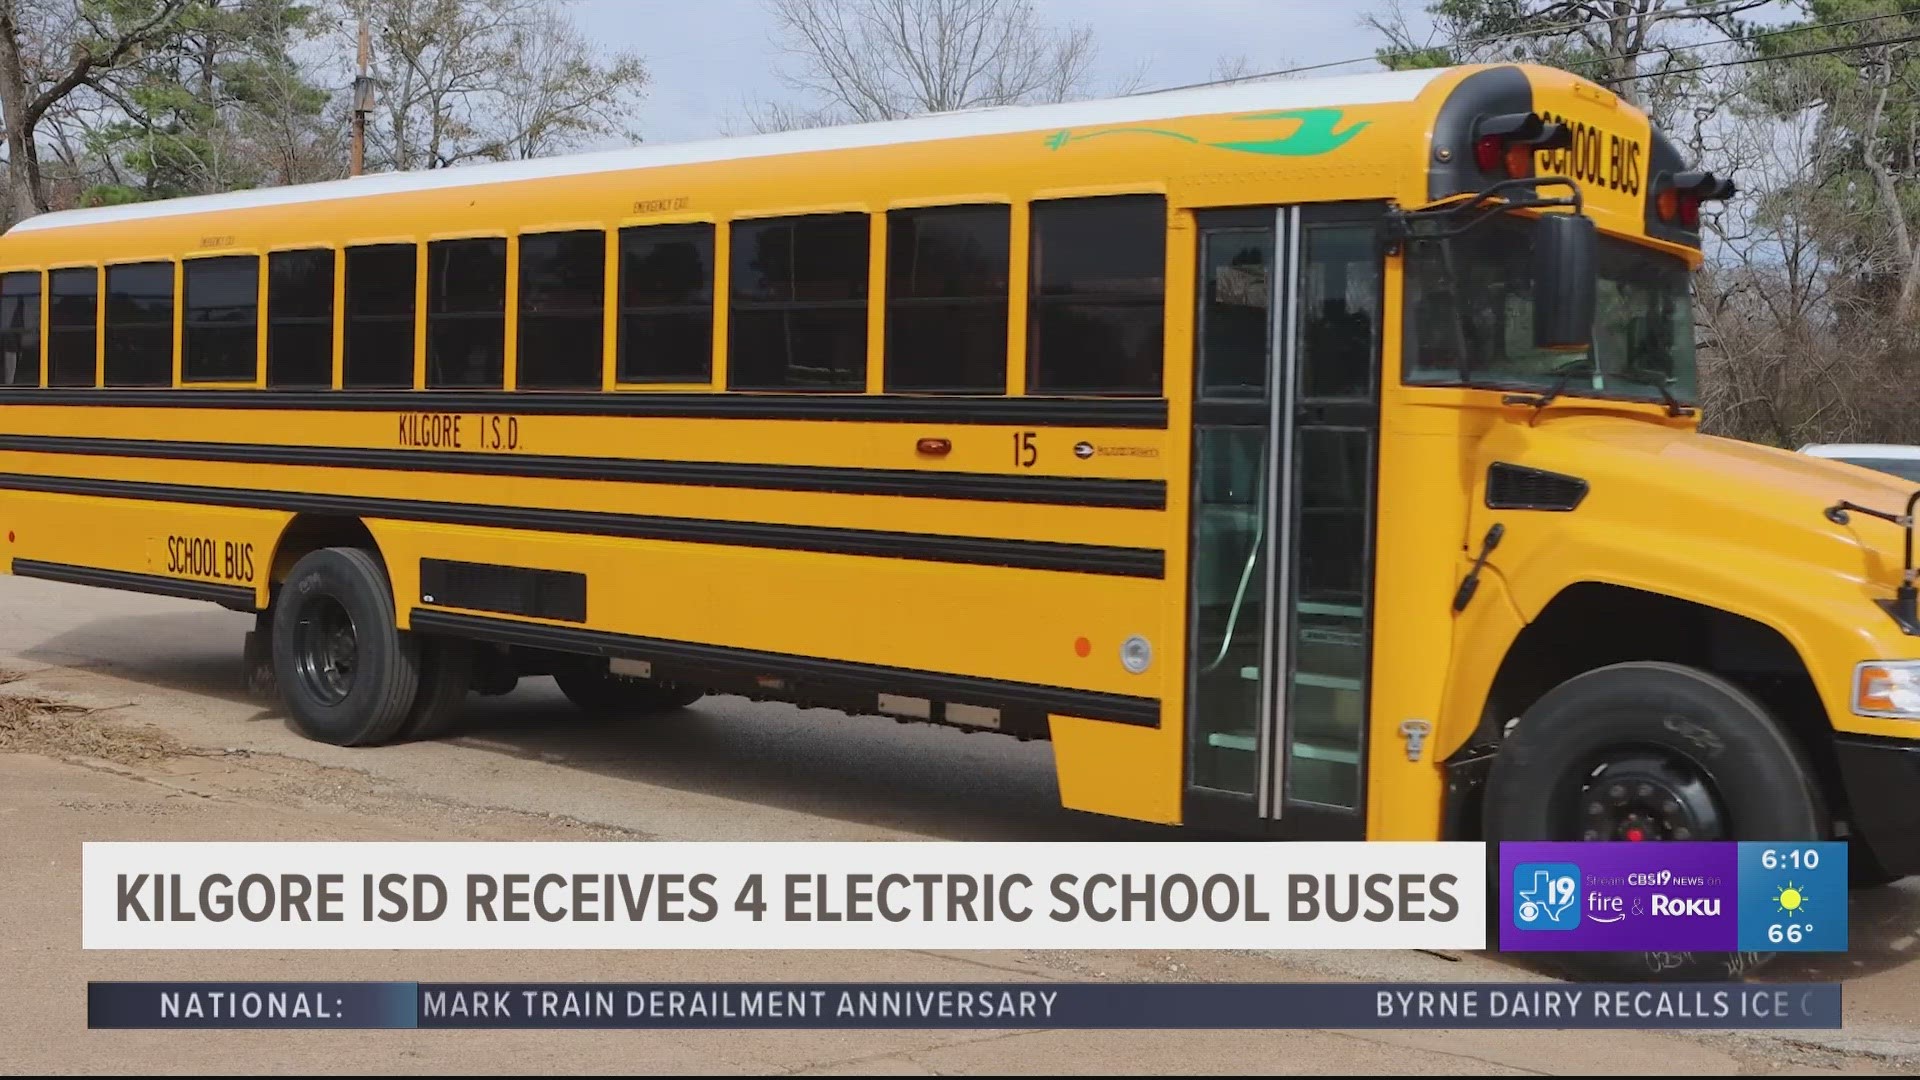 Wheeler says while the technology is still in its early stages, the electric buses boast a range of approximately 120 miles on a single charge.